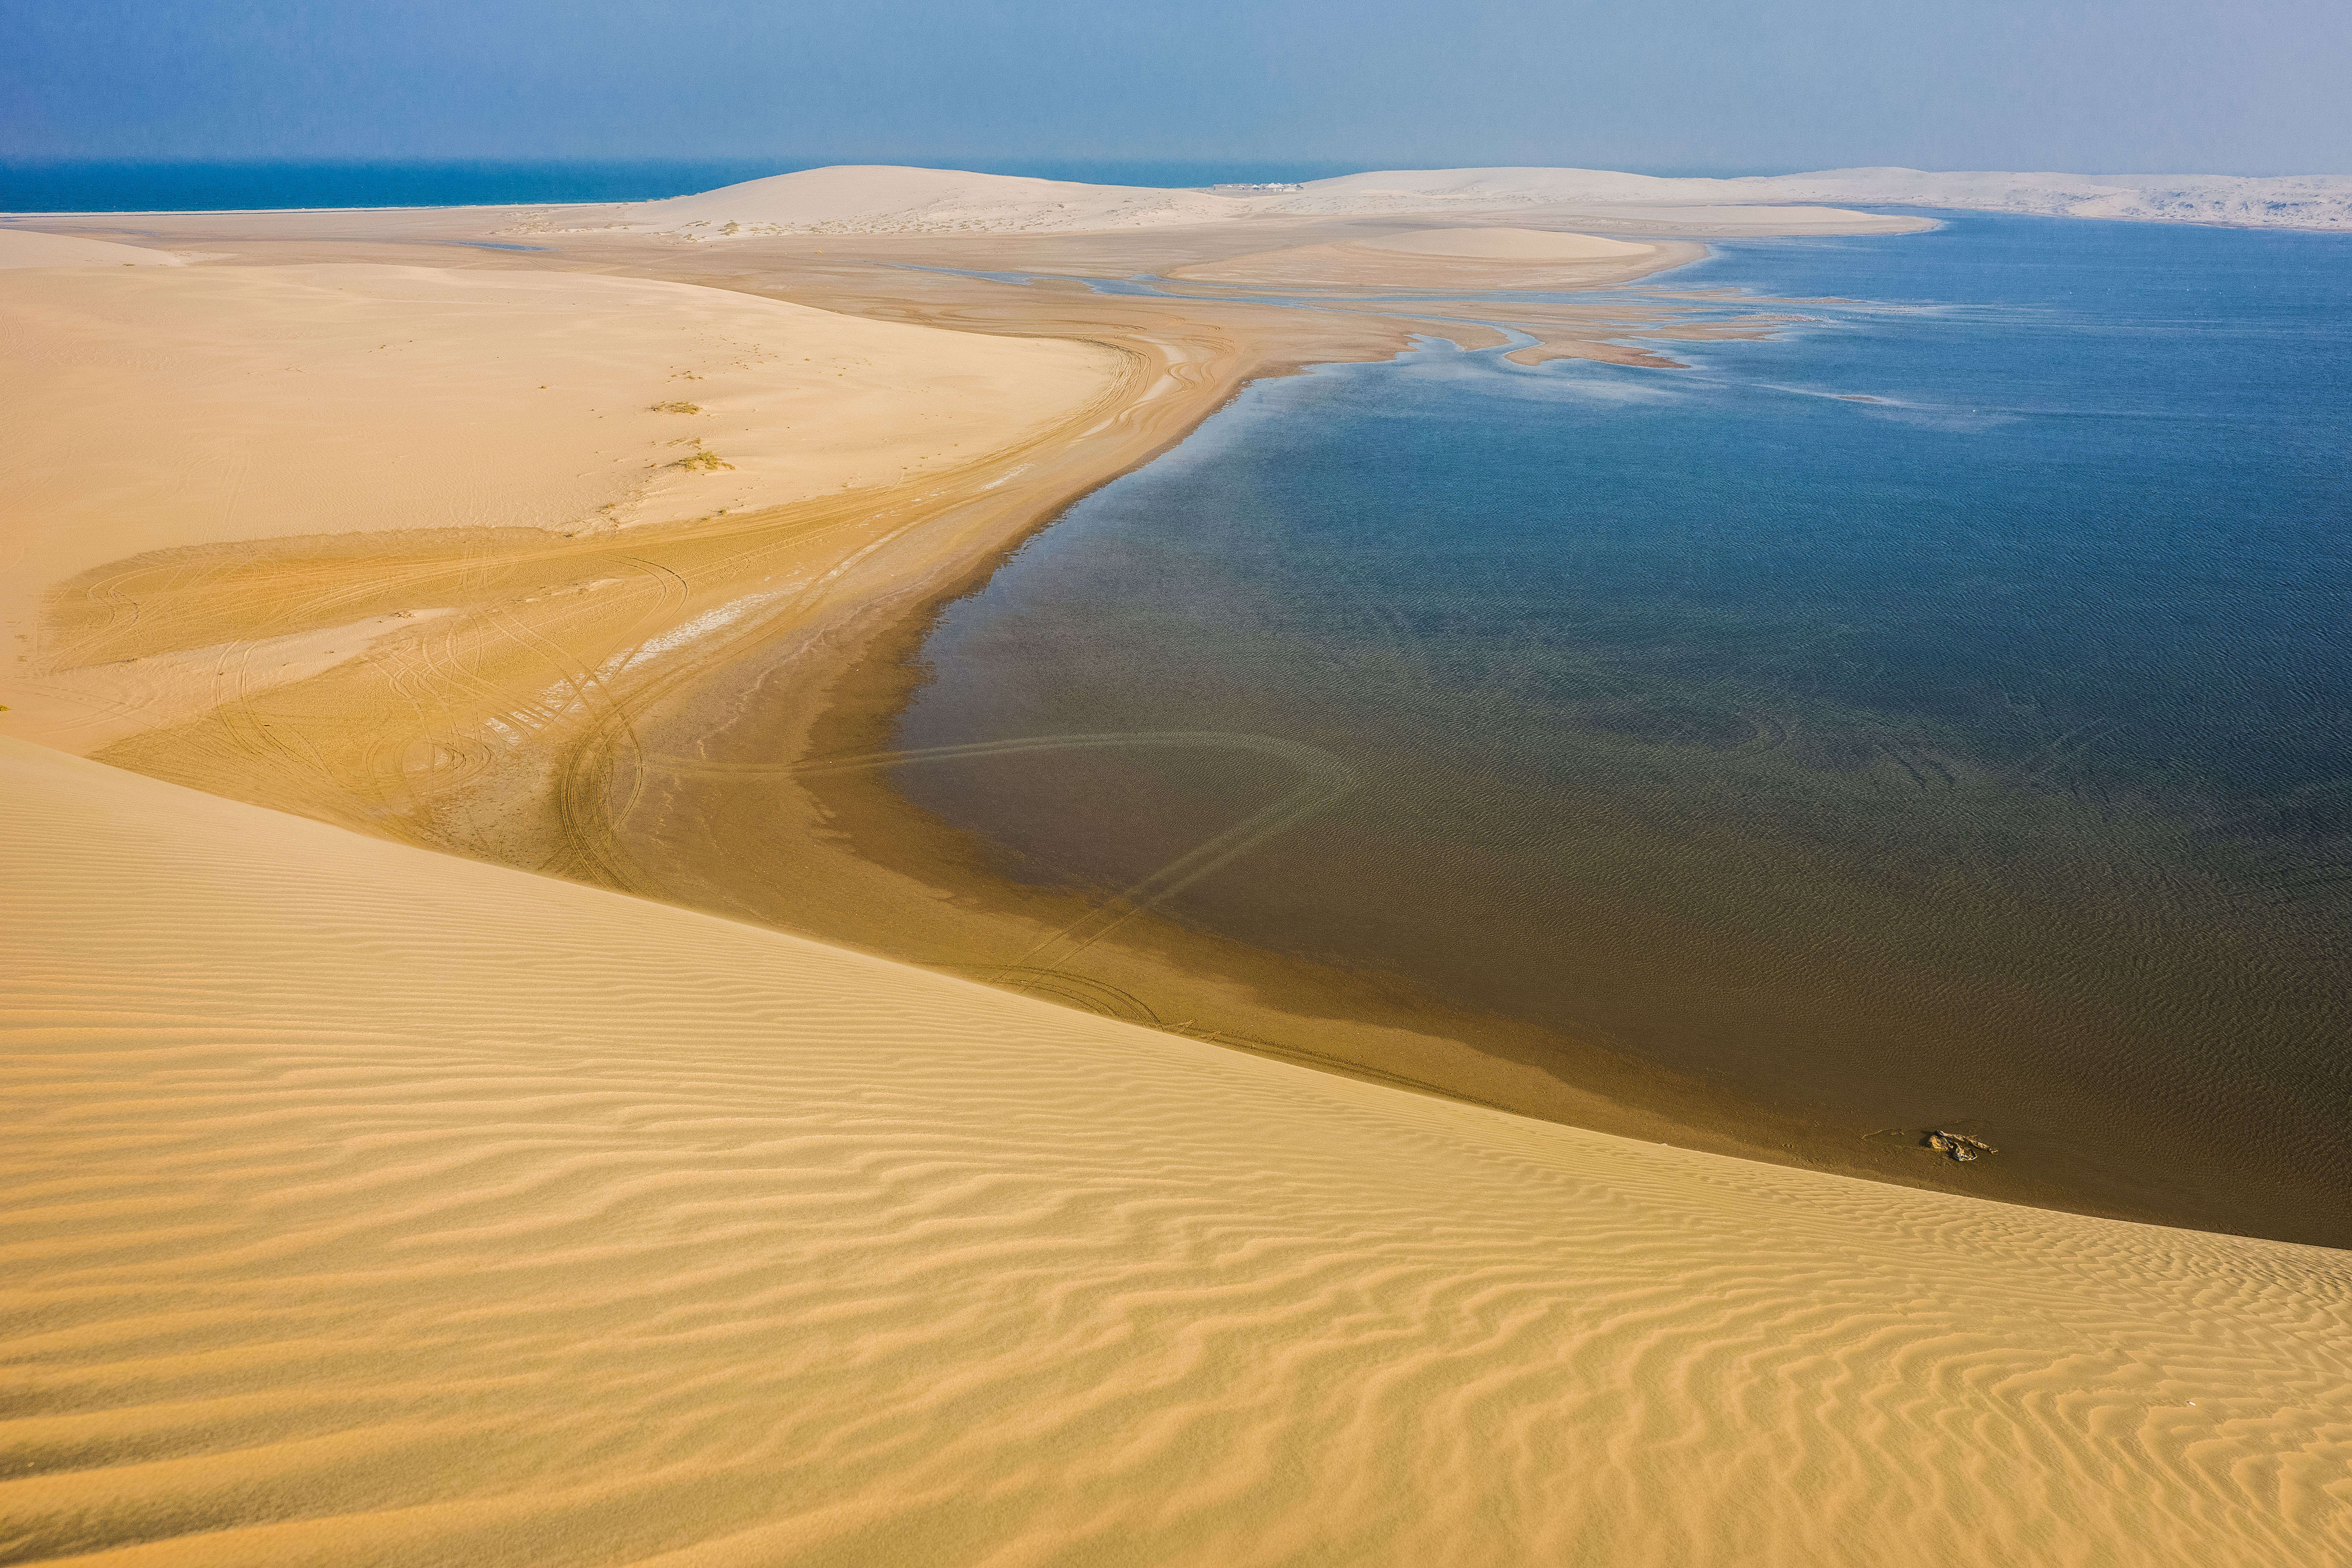 Khor al Adaid, the Inland Sea, is a seawater inlet right at the bottom end of the Qatar peninsula